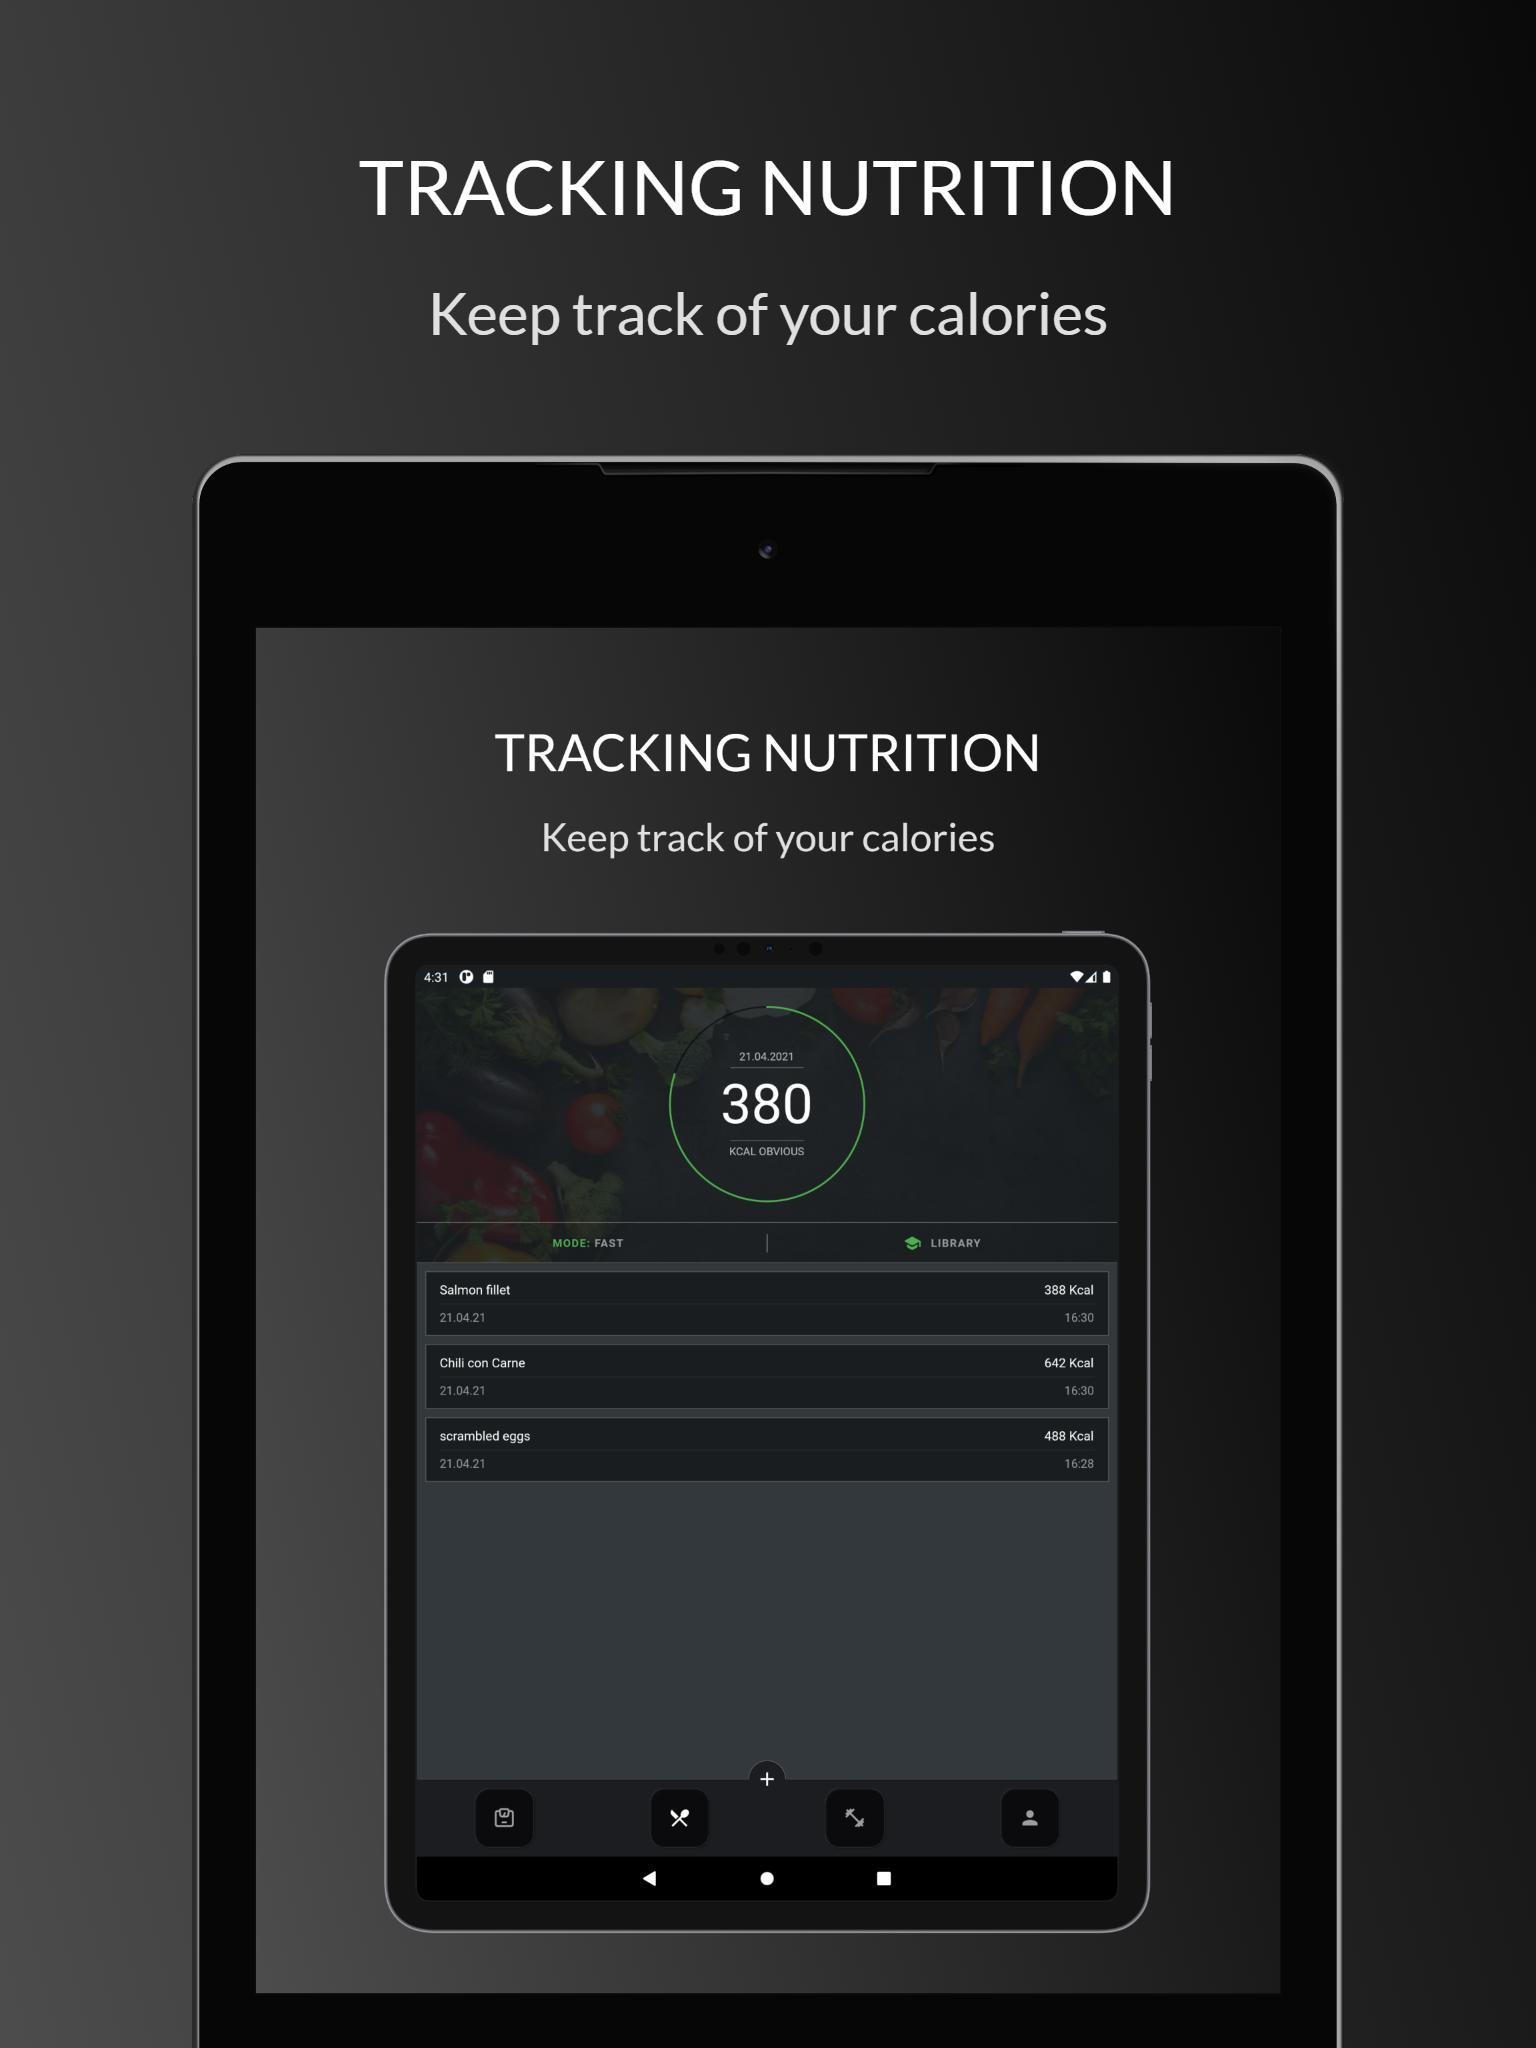 All in One Fitness - Weight Loss, Workouts & More 1.2.2 Screenshot 15